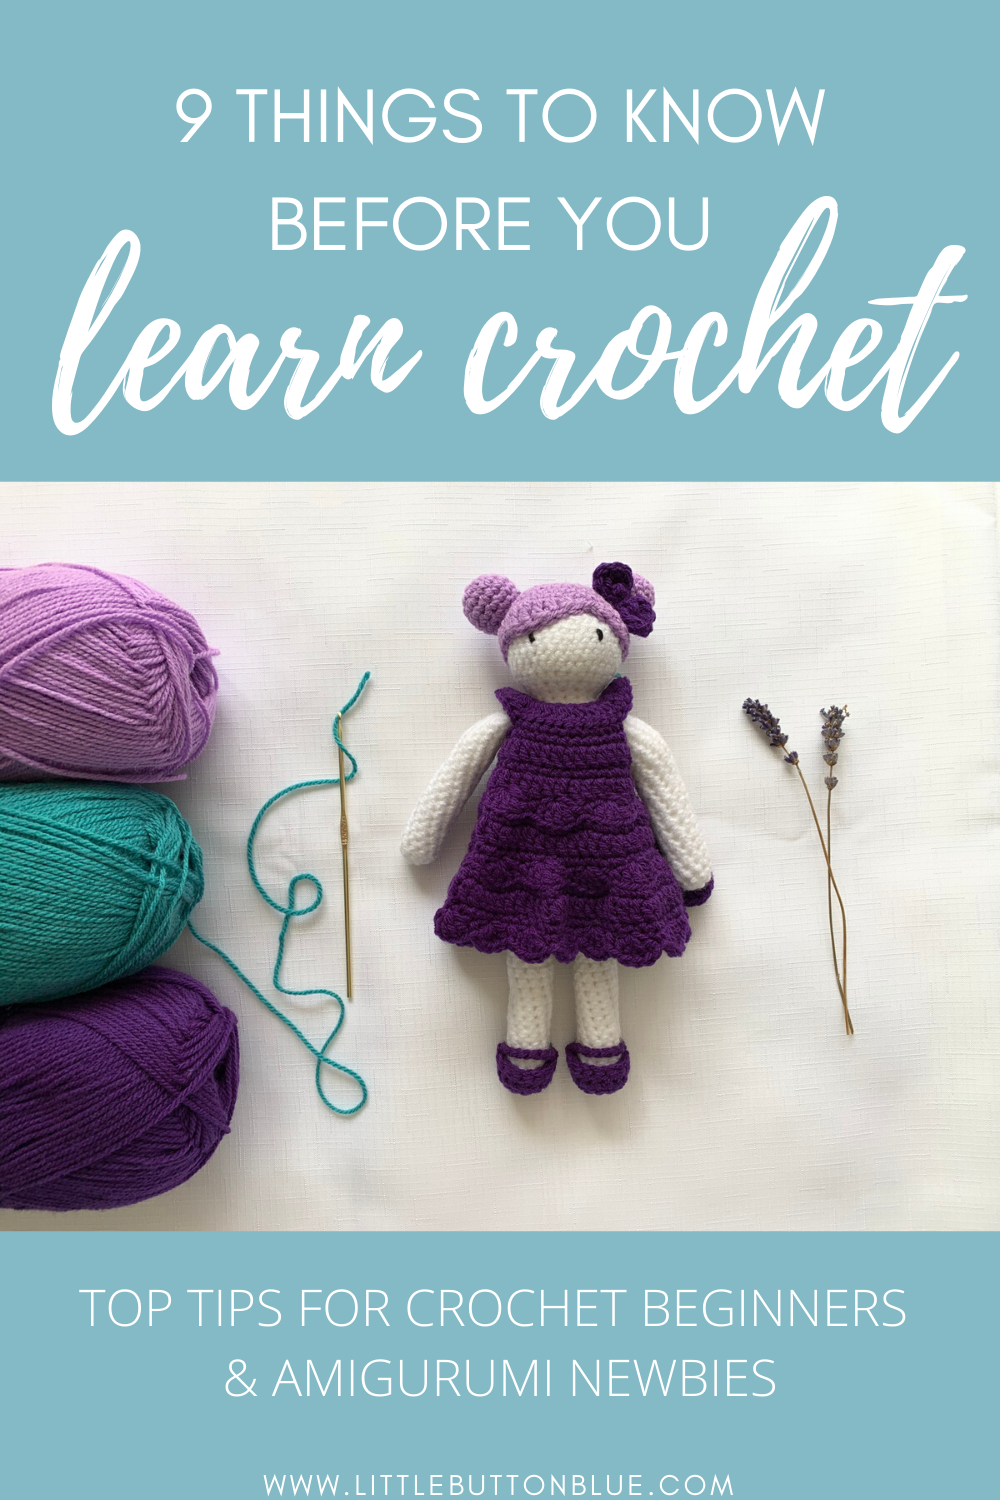 9 things to know before you learn crochet. Top tips for crochet beginners and amigurumi newbies.